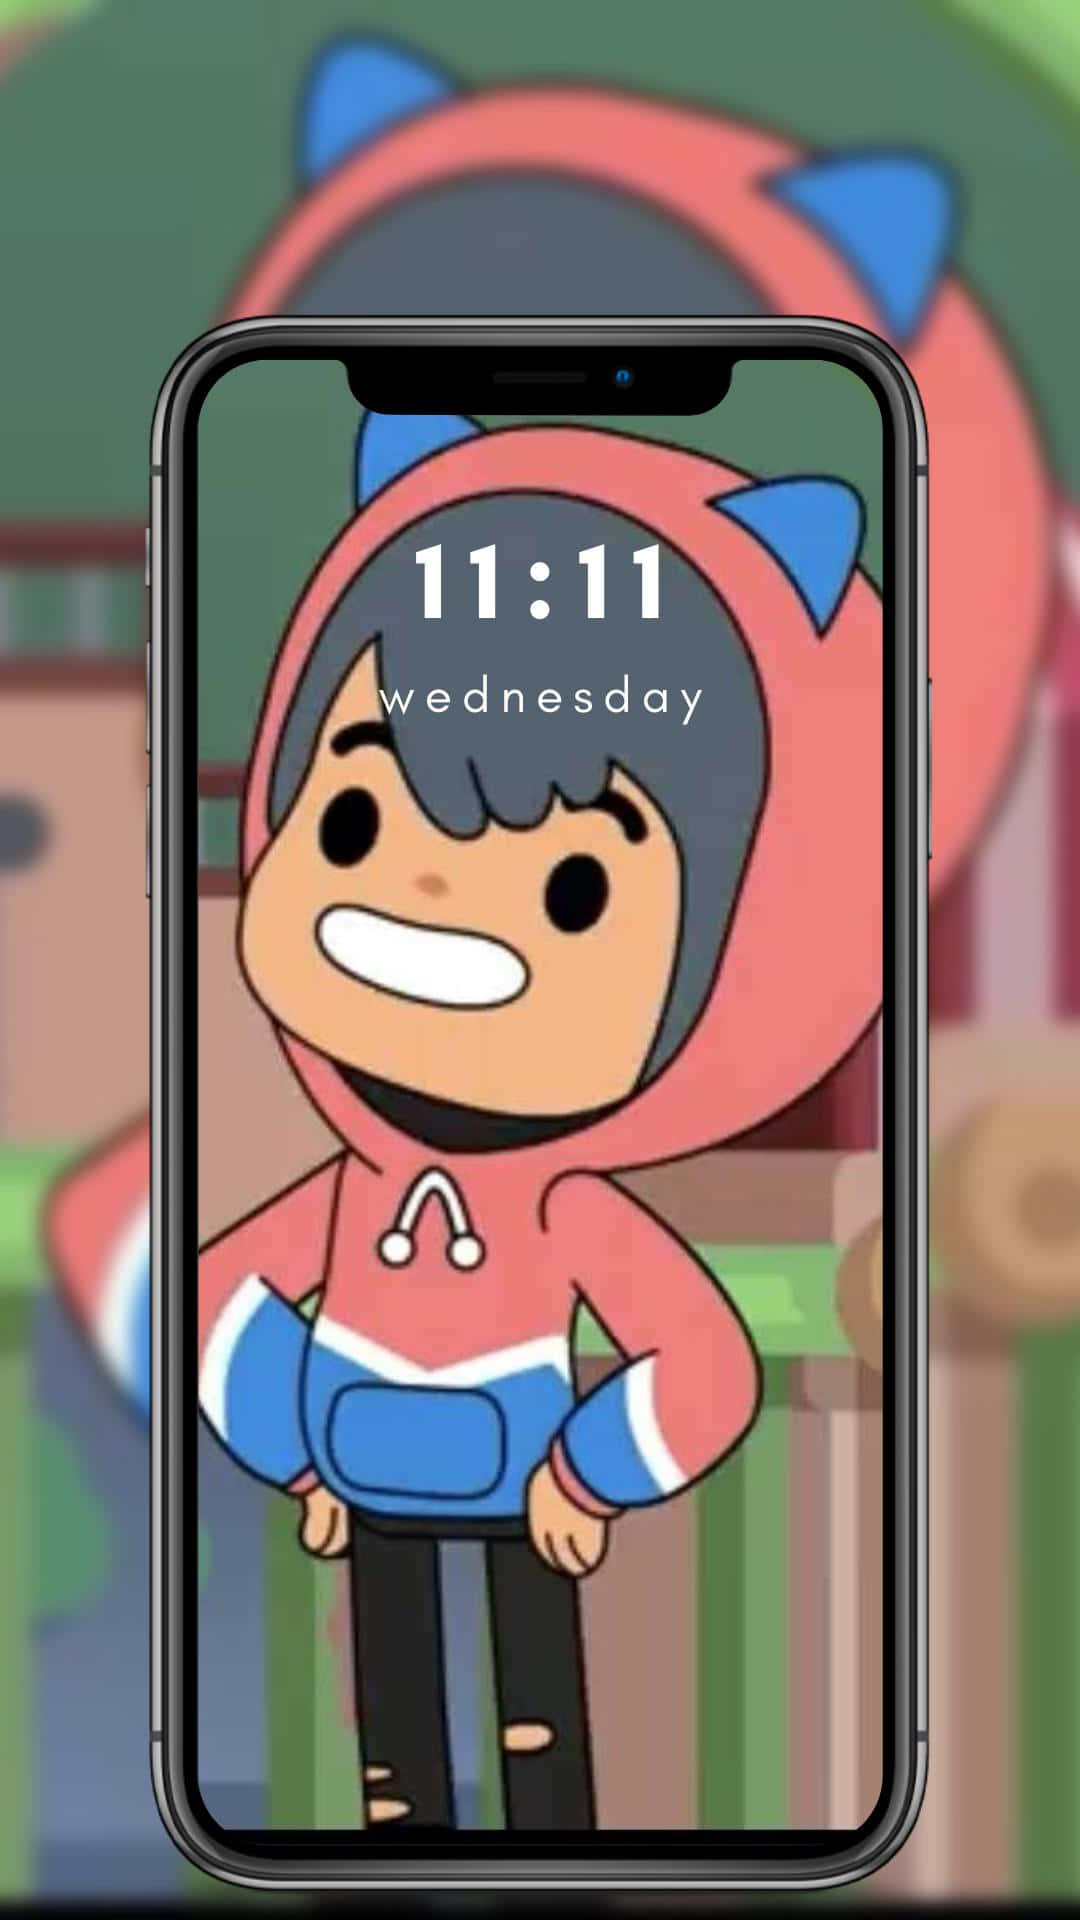 A Cartoon Character Is Shown On An Iphone